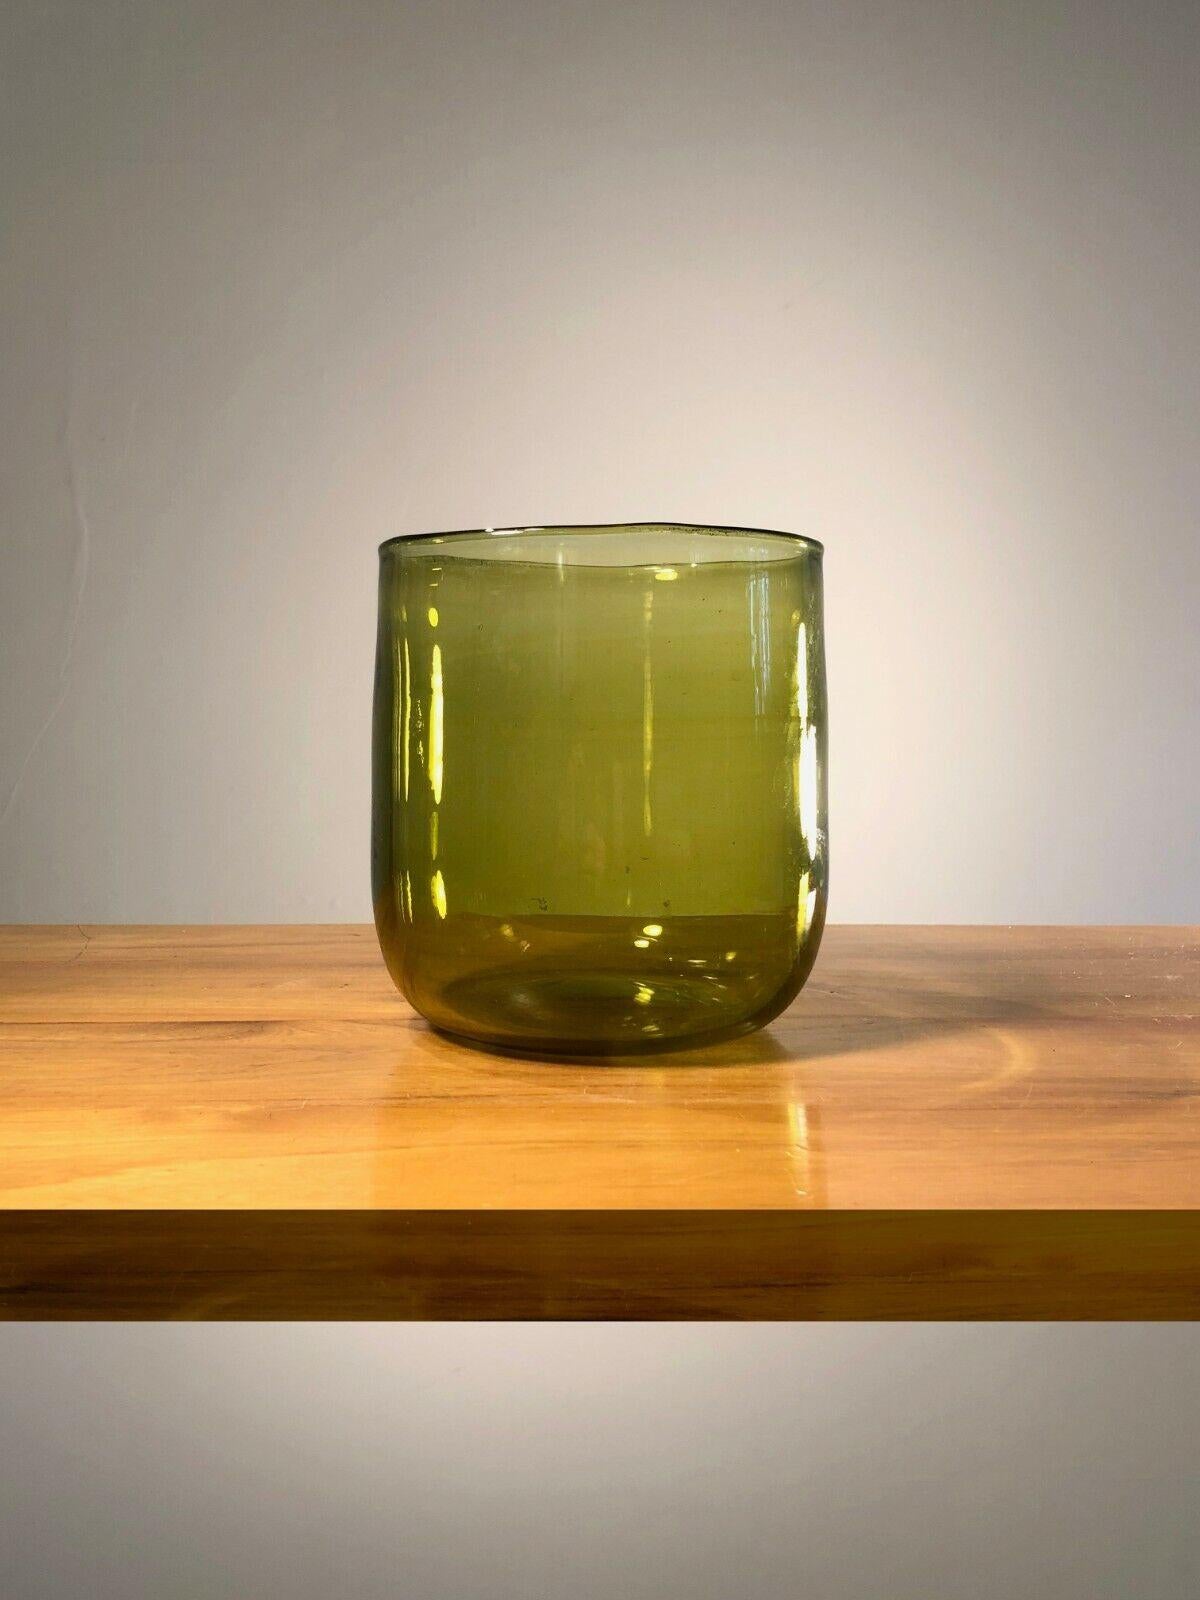 A MID-CENTURY-MODERN Blown GLASS VASE by CLAUDE MORIN, DIEULEFIT, France 1970 For Sale 4